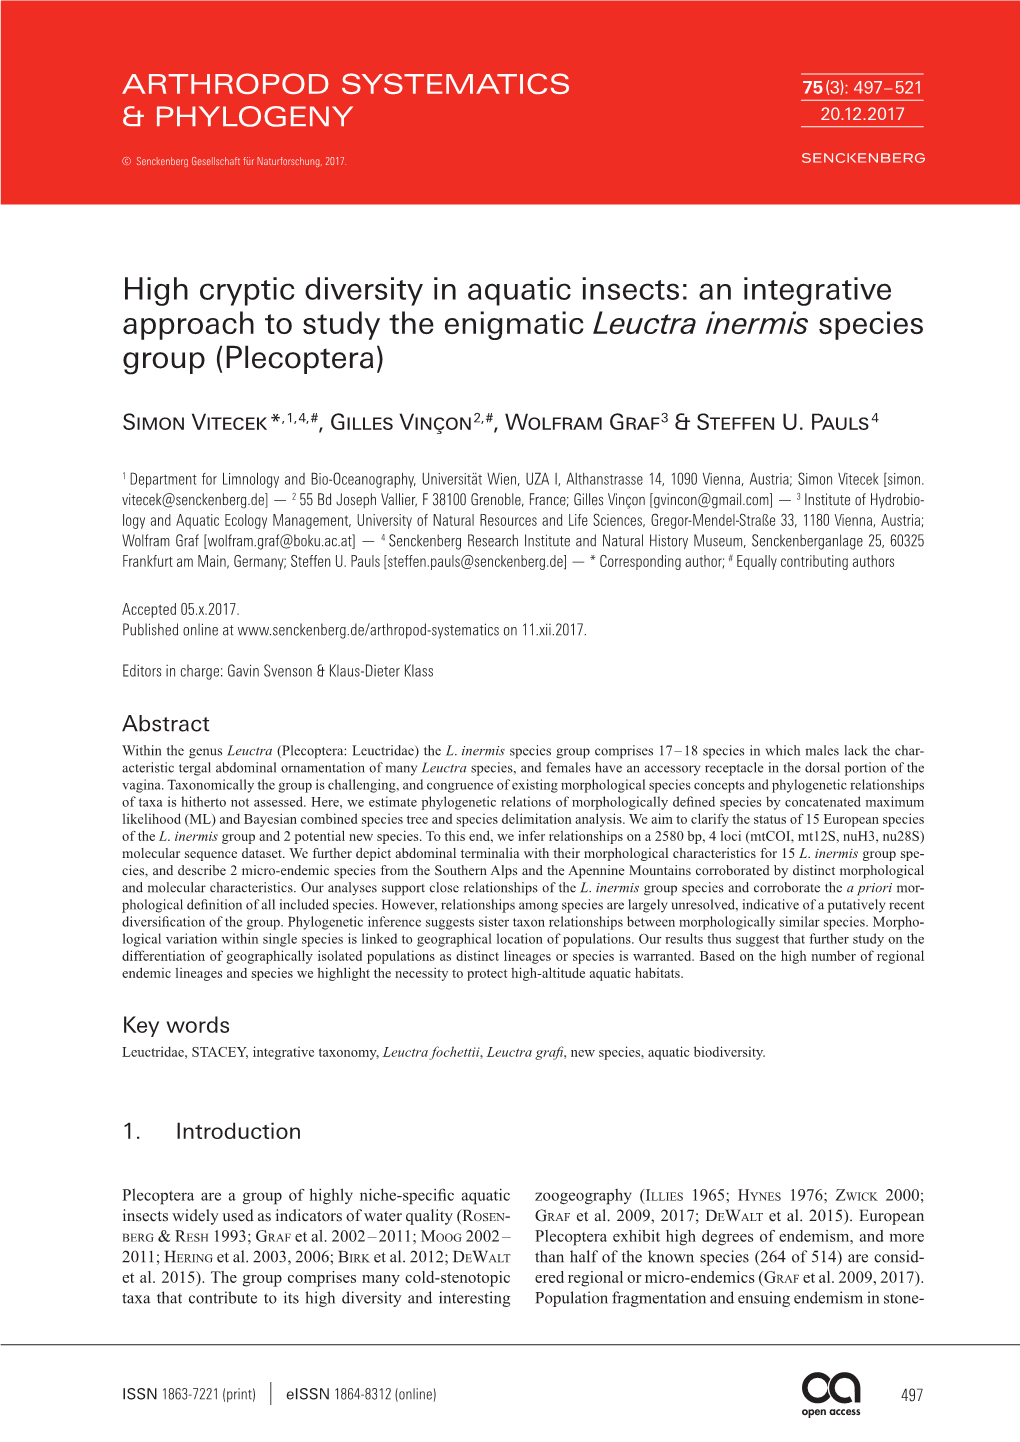 High Cryptic Diversity in Aquatic Insects: an Integrative Approach to Study the Enigmatic Leuctra Inermis Species Group (Plecoptera)